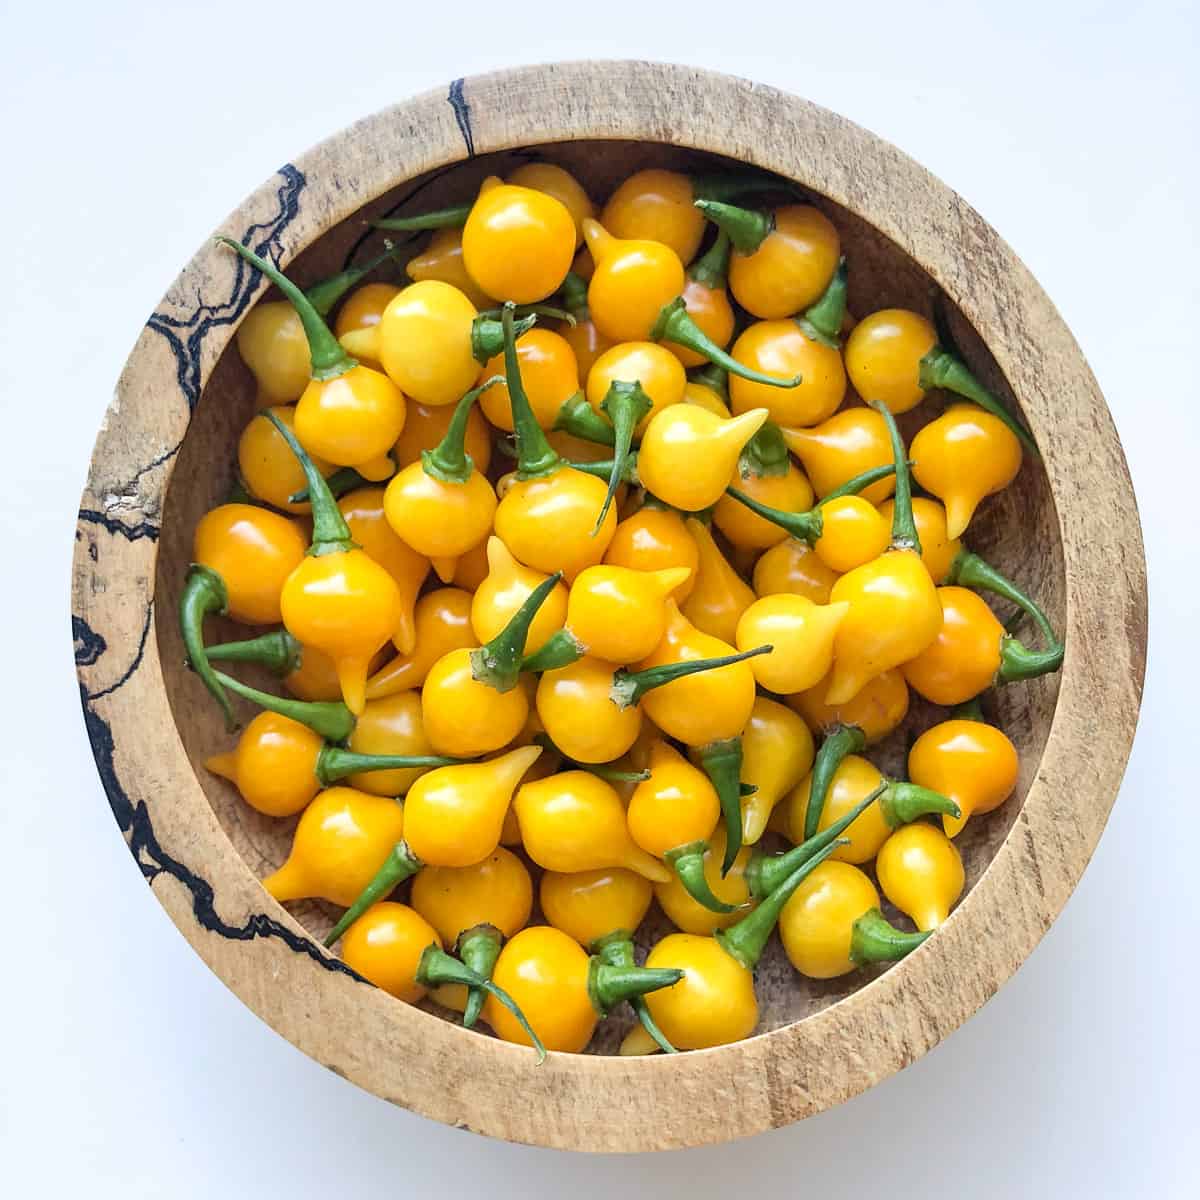 A bowl filled with small yellow hot peppers.